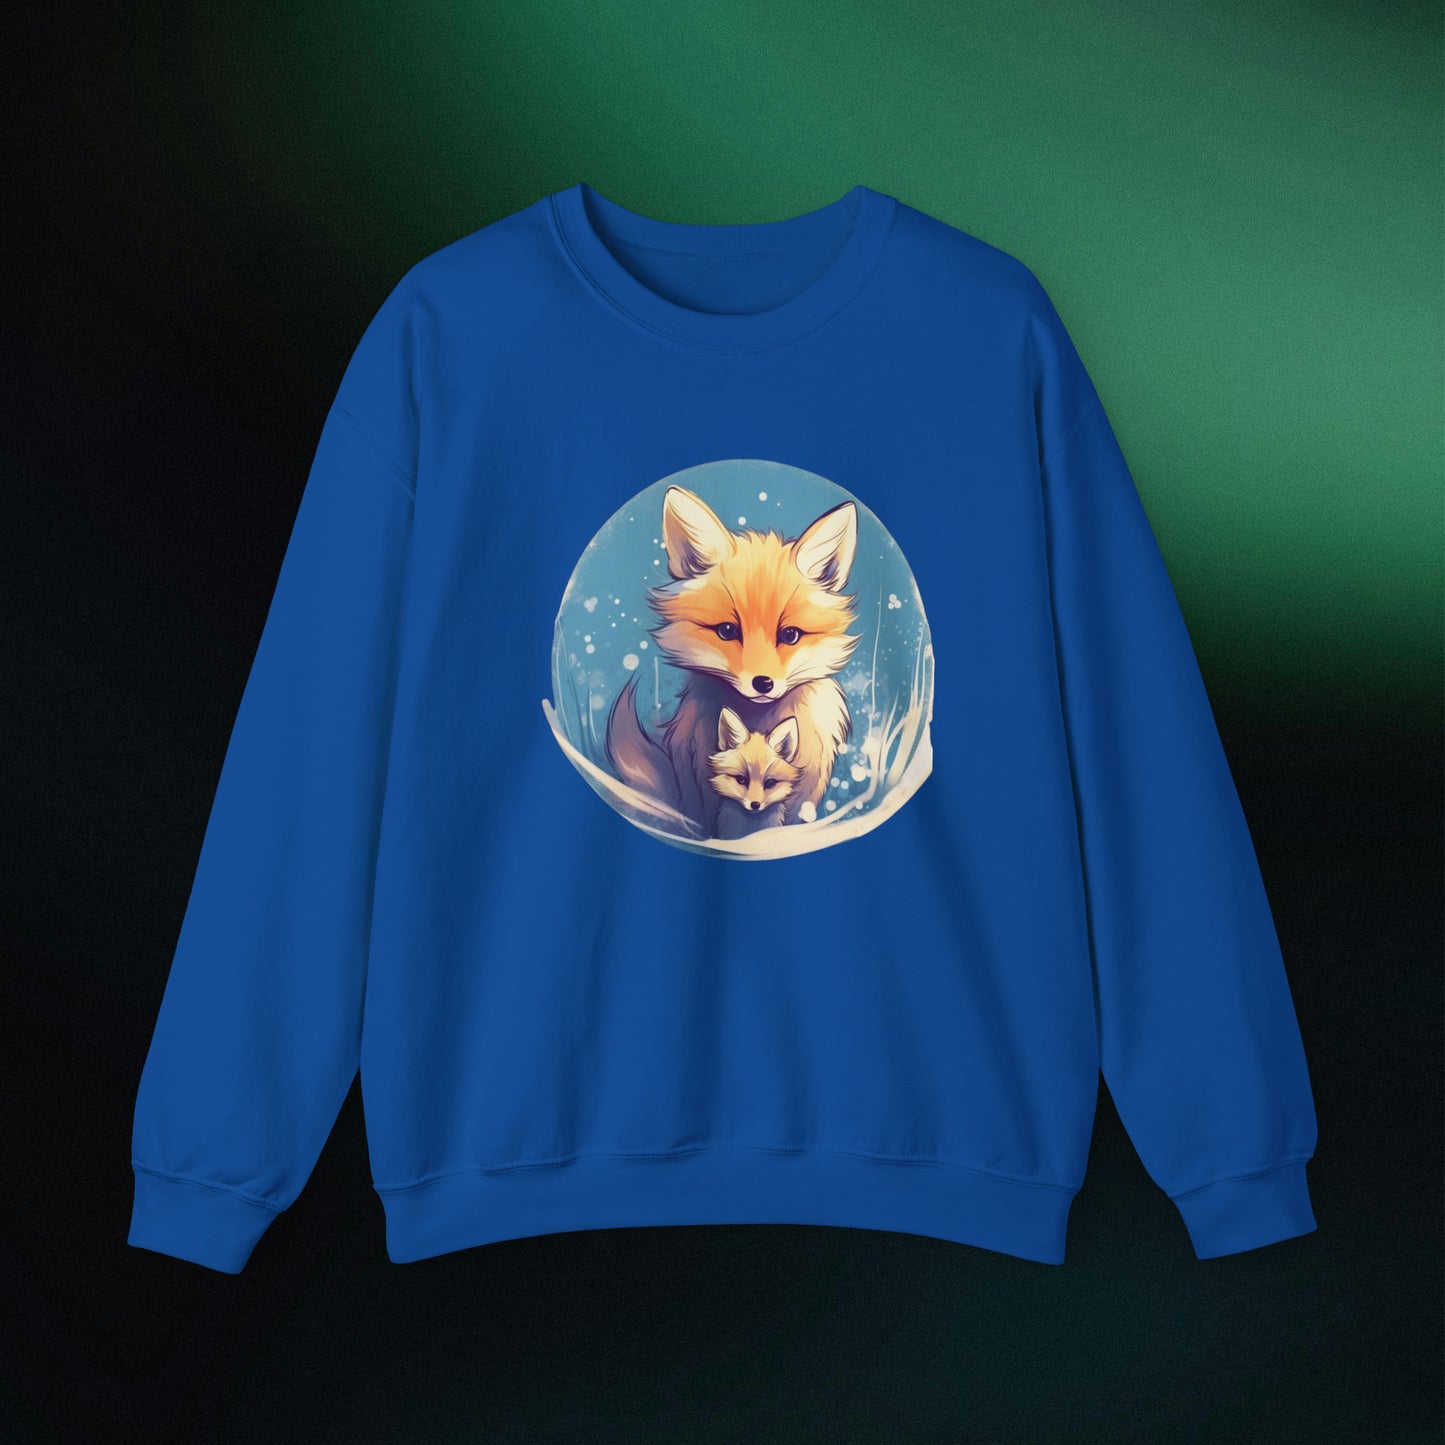 Vintage Forest Witch Aesthetic Sweatshirt - Cozy Fox Cottagecore Sweater with Mommy and Baby Fox Design Sweatshirt S Royal 